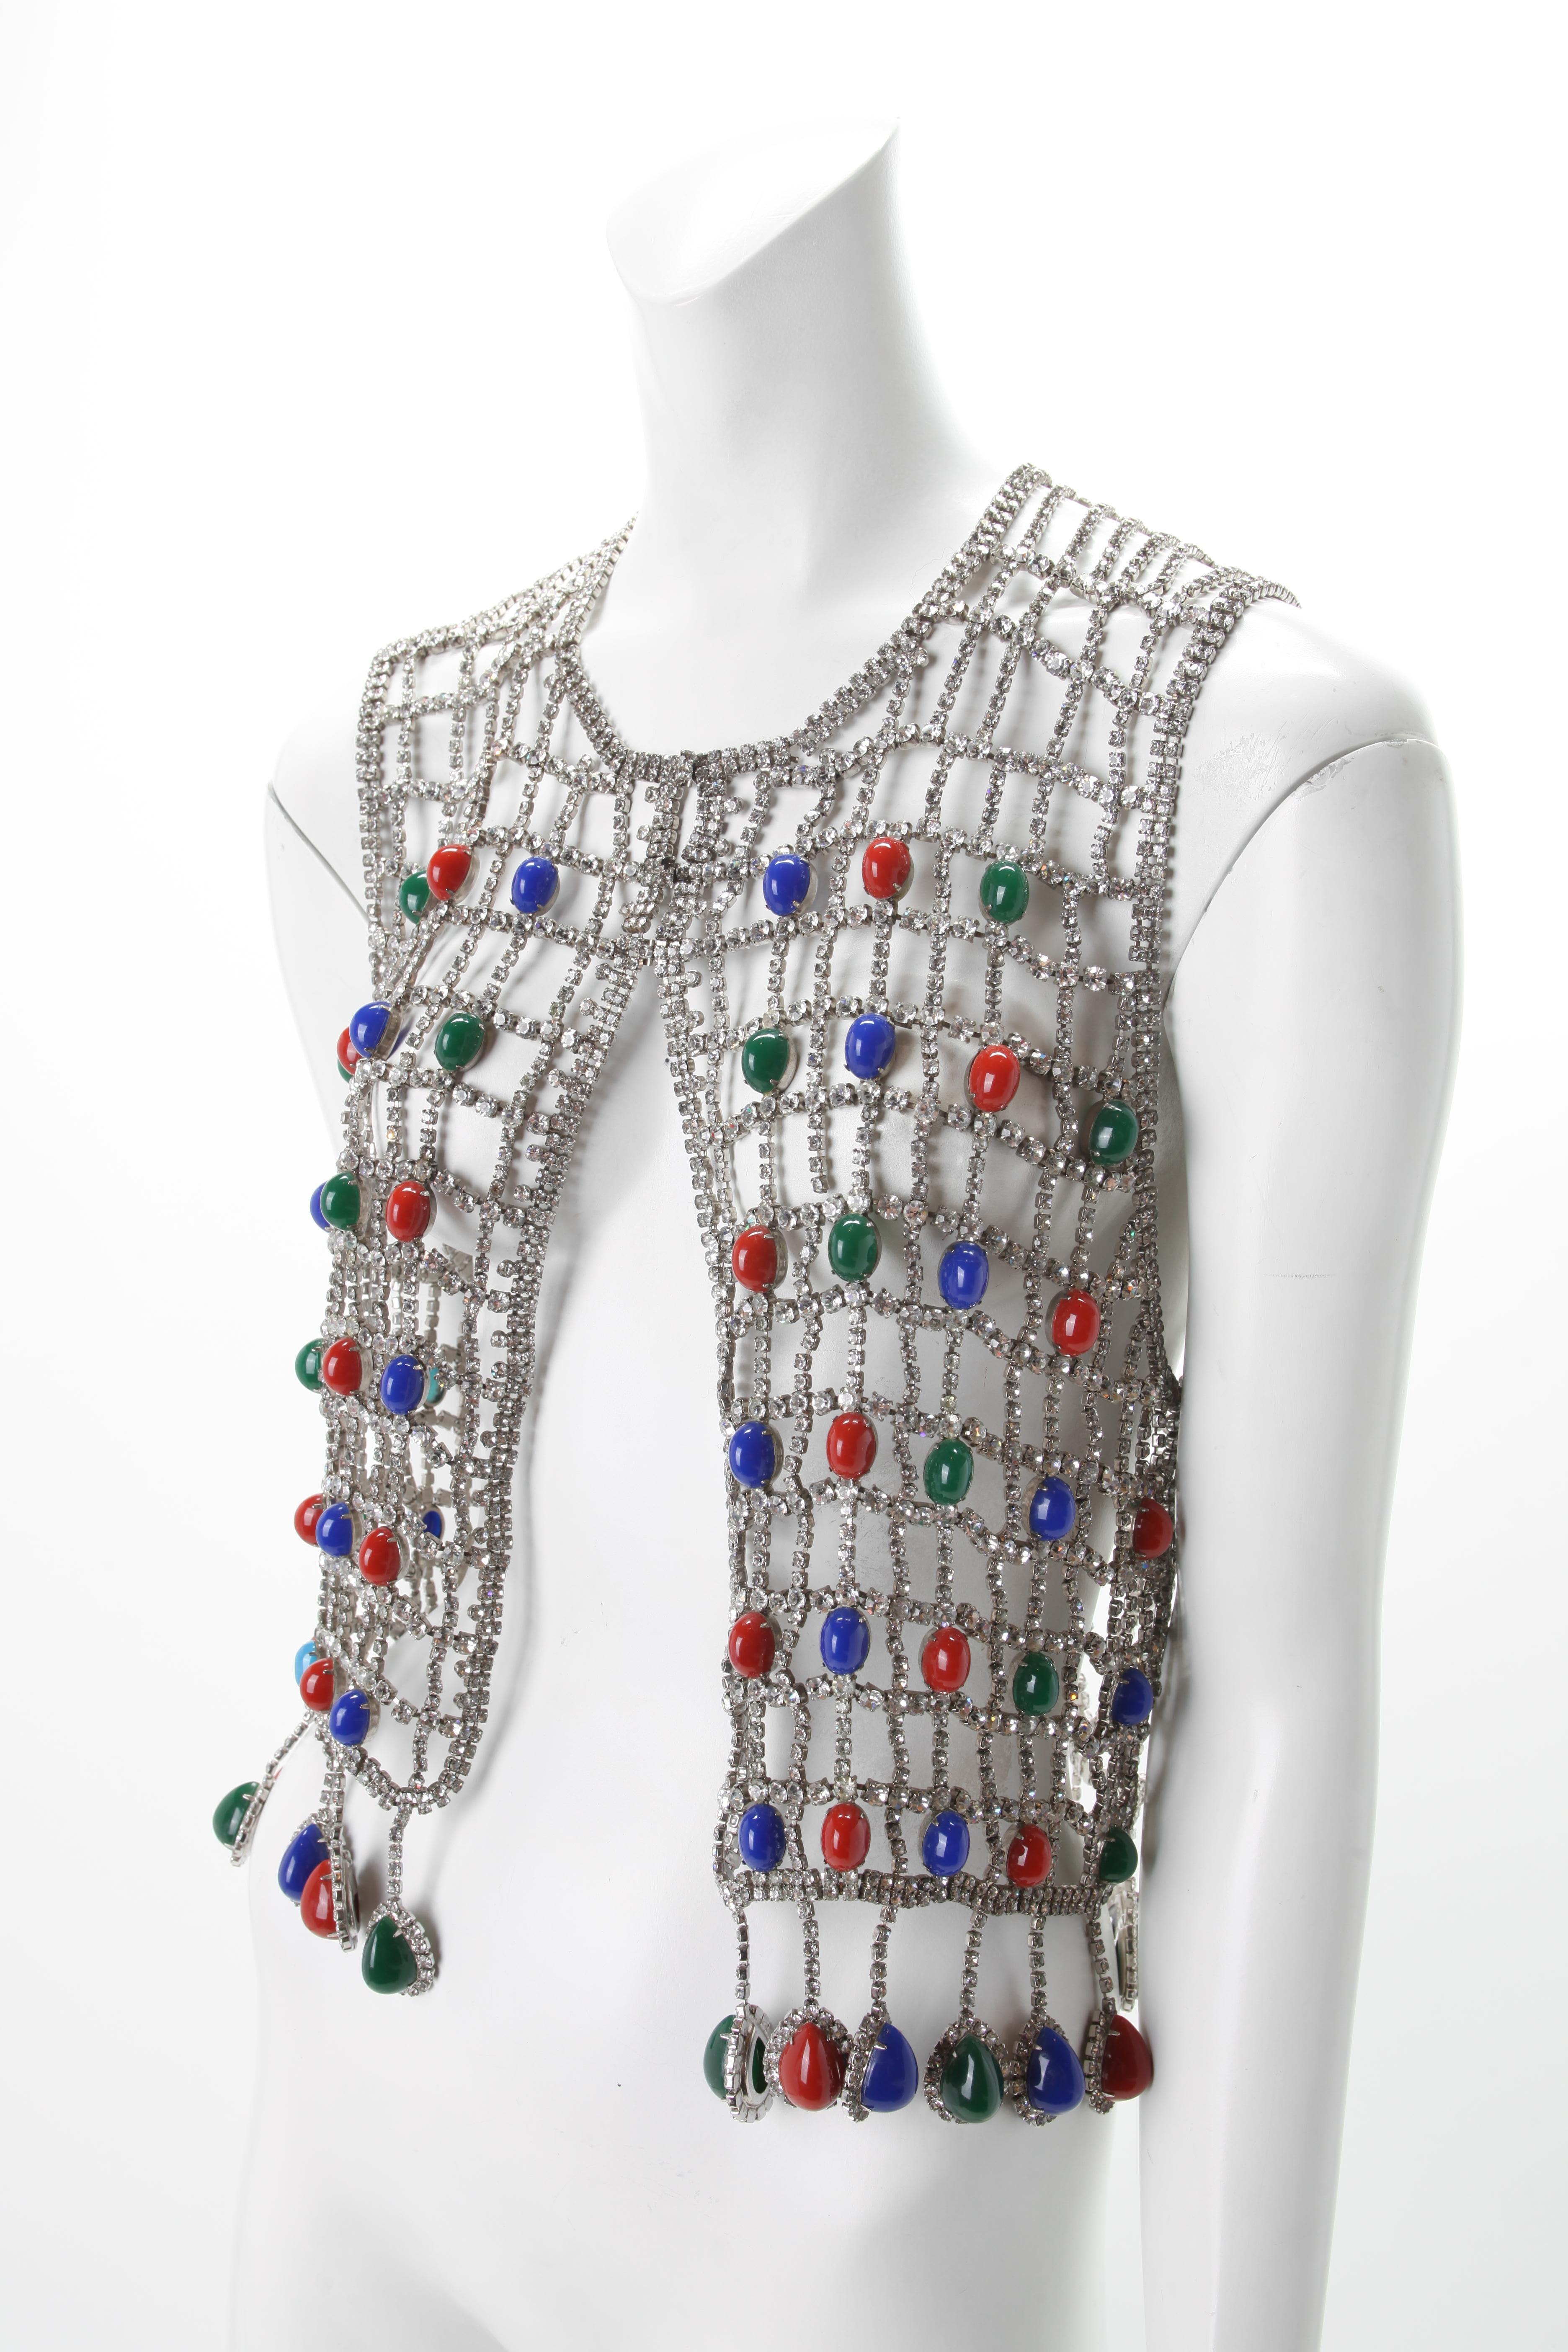 Rhinestone Vest with Multi Colored cabochon Beads, c.1970s
Spiderweb Rhinestone vest with large blue, green and red beads throughout. Features Rhinestone and large bead tassels along the waistline. 

Fits US Size 0 to 4